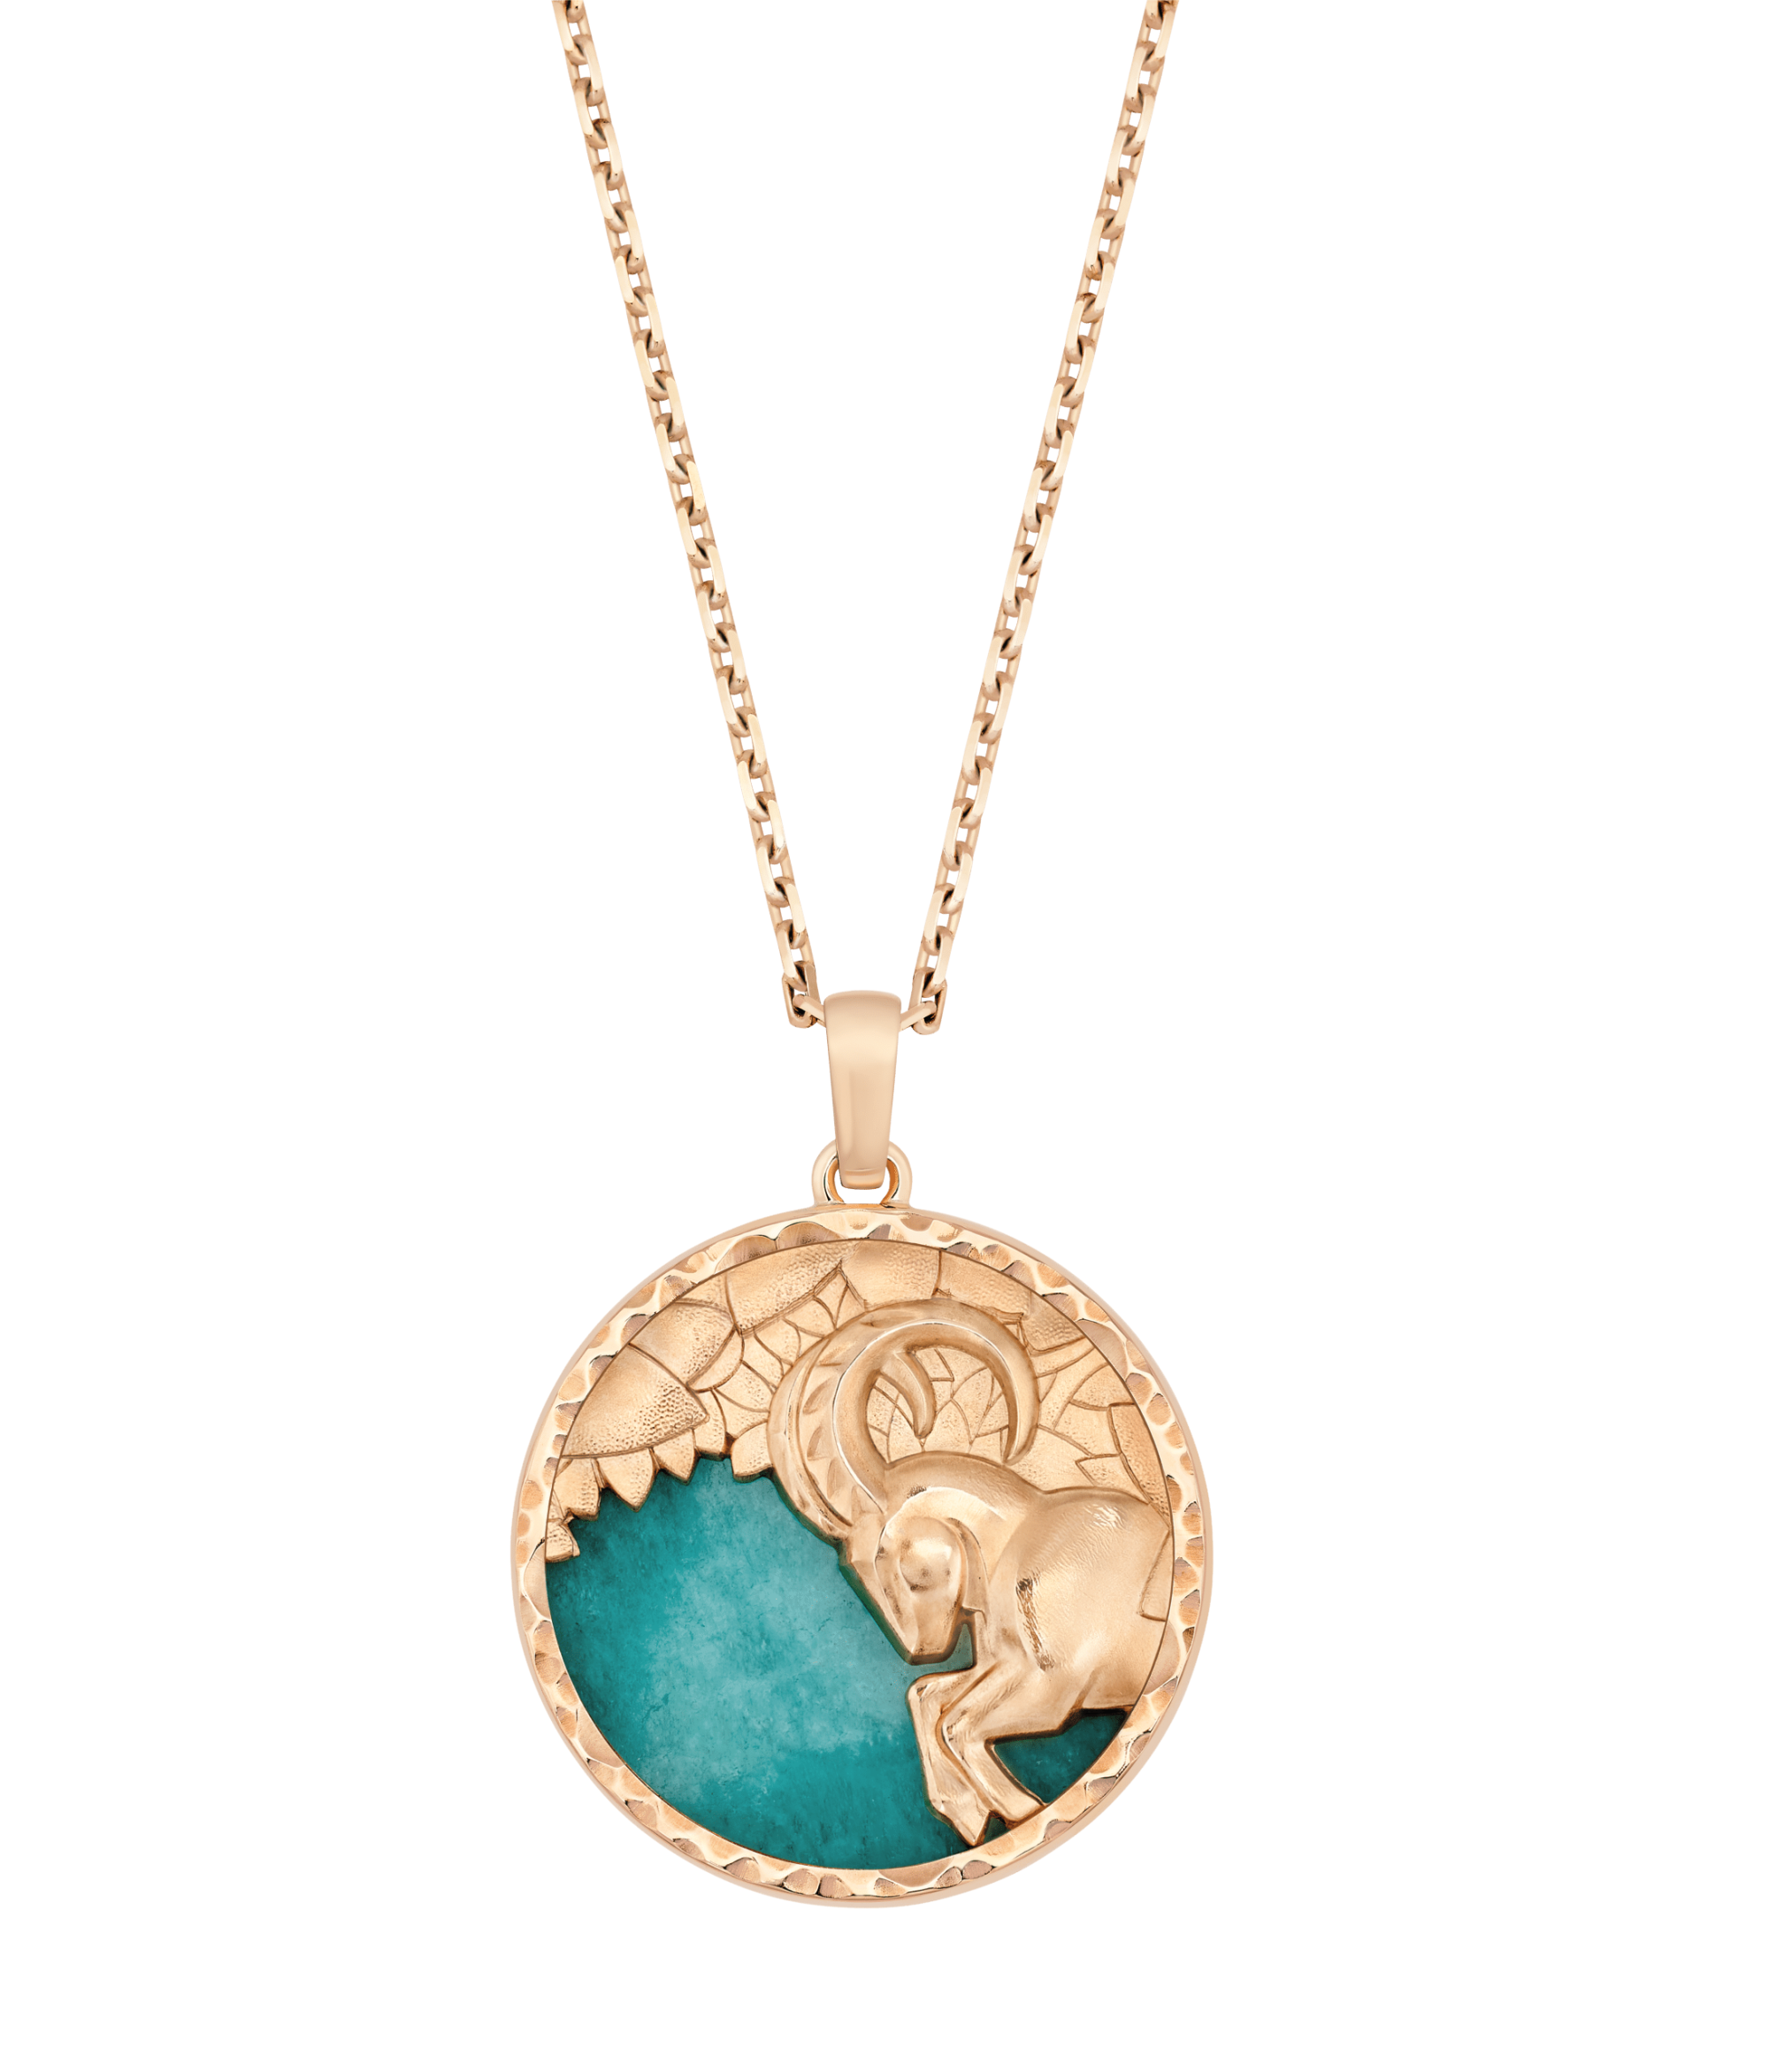 A round pendant necklace shows a Capricorn goat in gold against a green background.